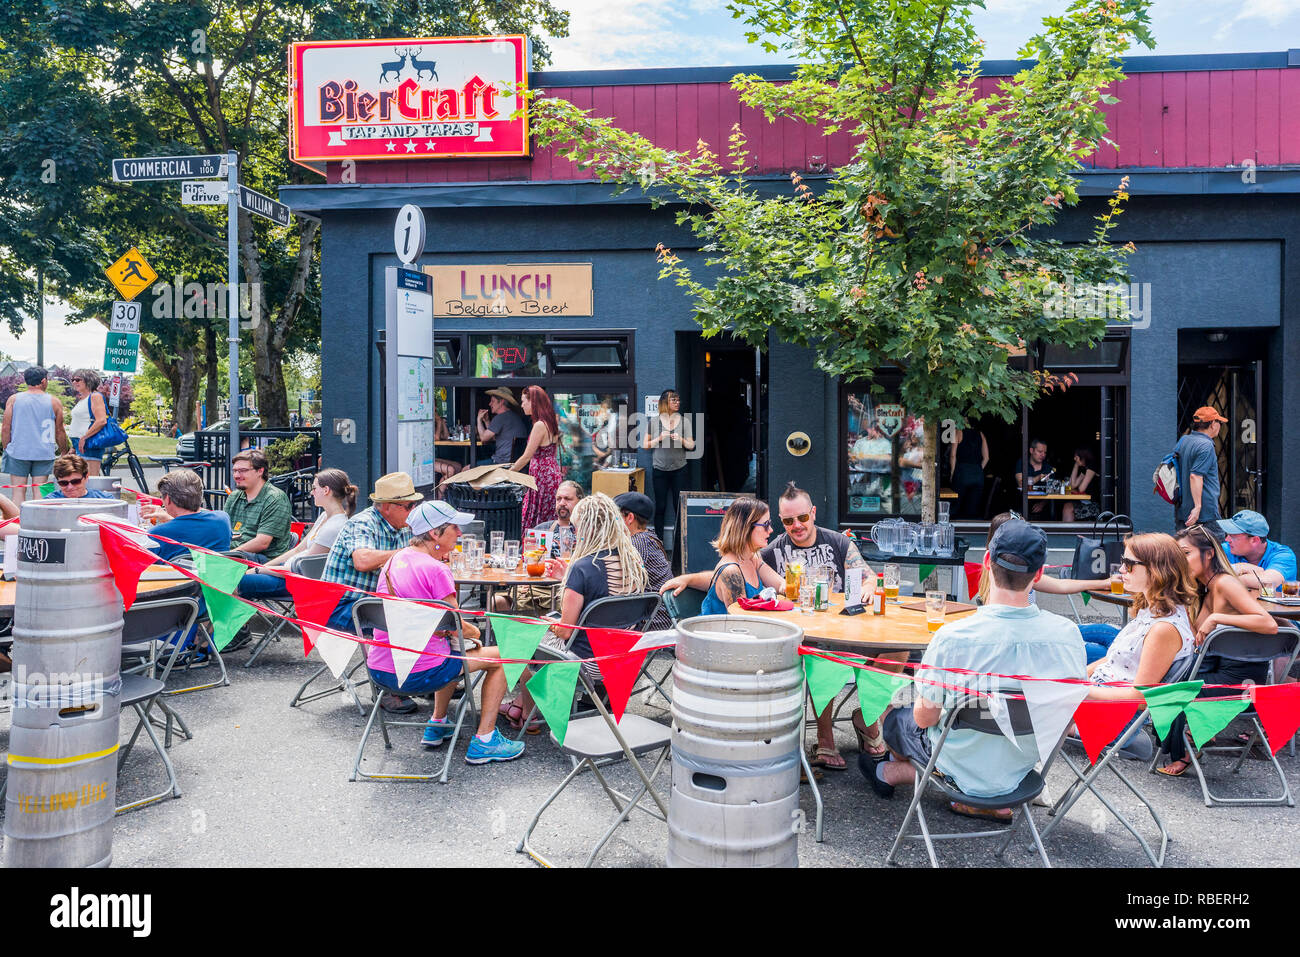 Biercraft Patio Car Free Day Commercial Drive Vancouver British Columbia Canada Stock Photo Alamy